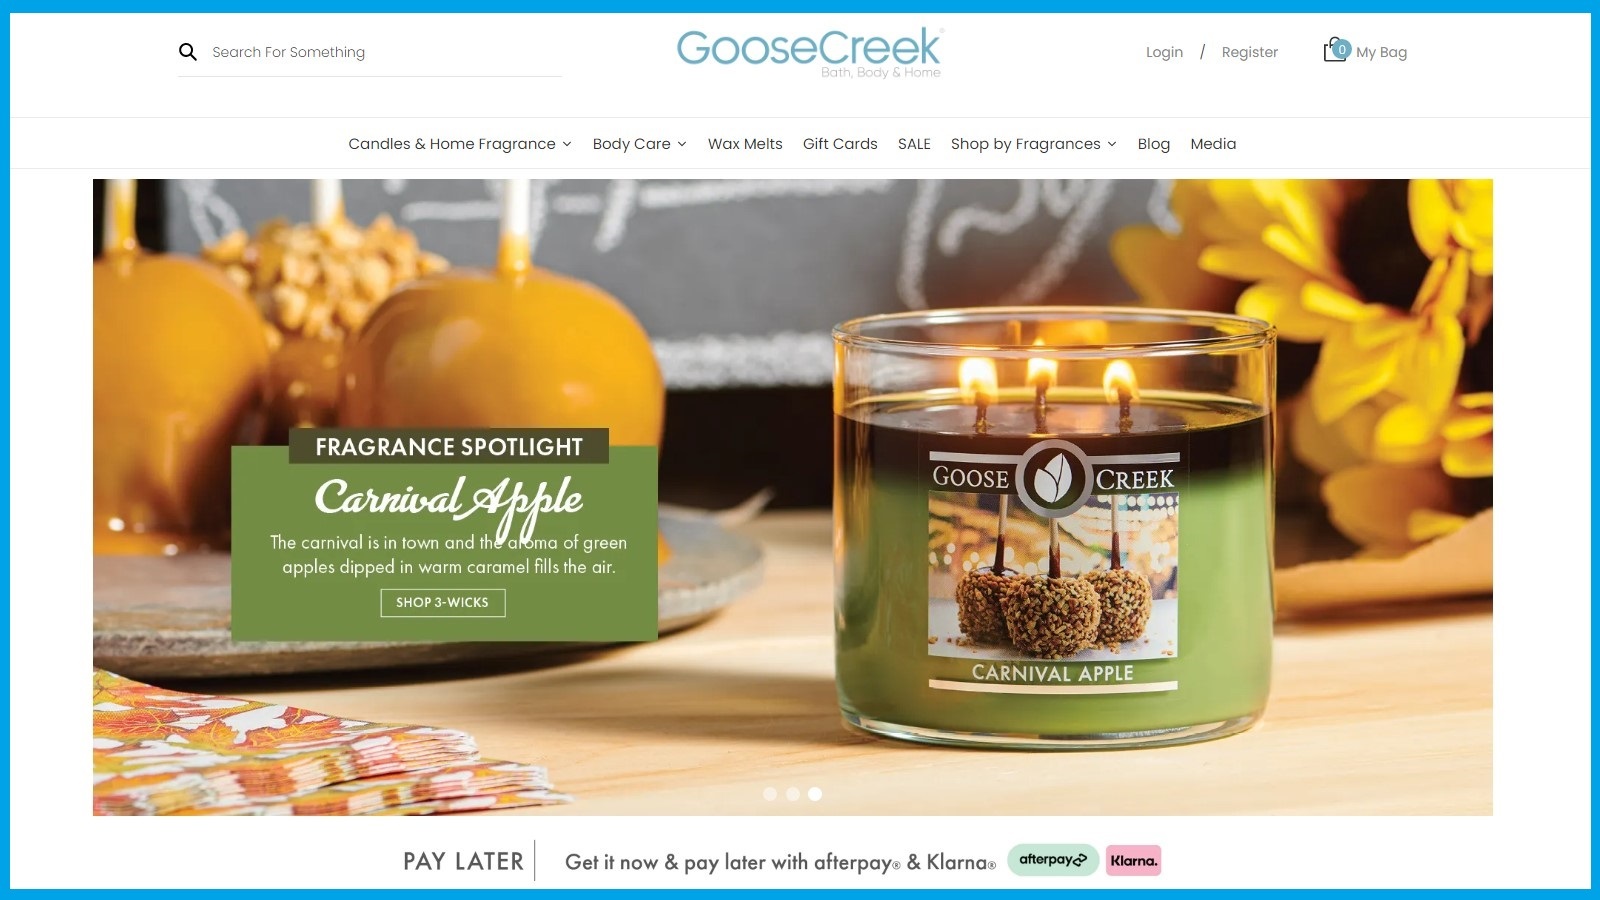 Goose Creek Candles Review: Why Is It So Popular Among Aromatherapy Lovers?